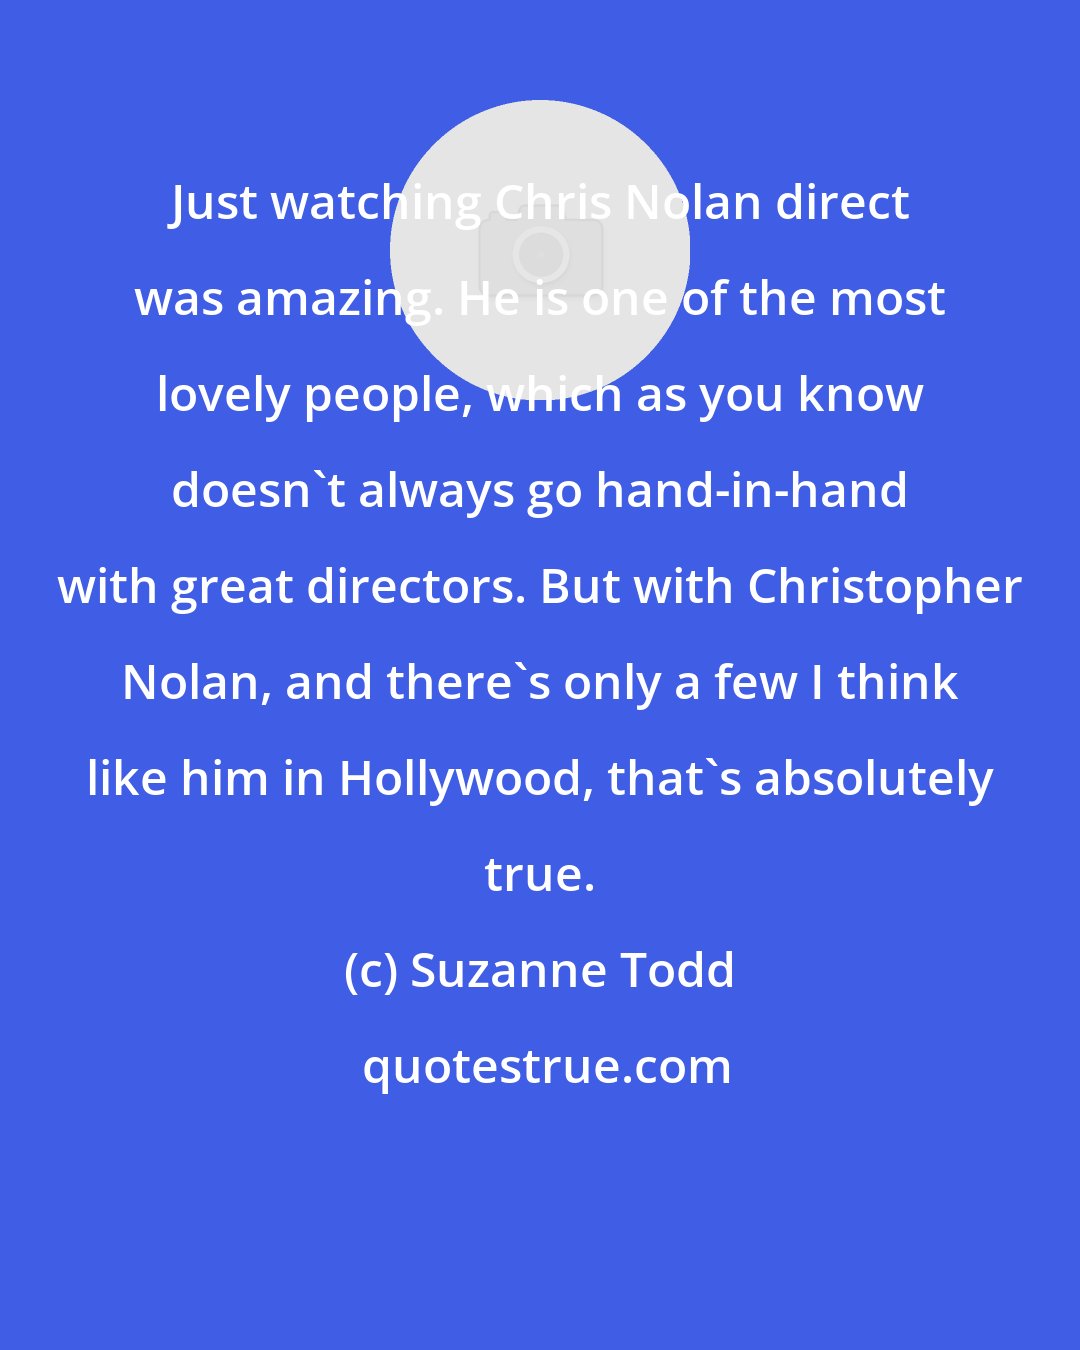 Suzanne Todd: Just watching Chris Nolan direct was amazing. He is one of the most lovely people, which as you know doesn't always go hand-in-hand with great directors. But with Christopher Nolan, and there's only a few I think like him in Hollywood, that's absolutely true.